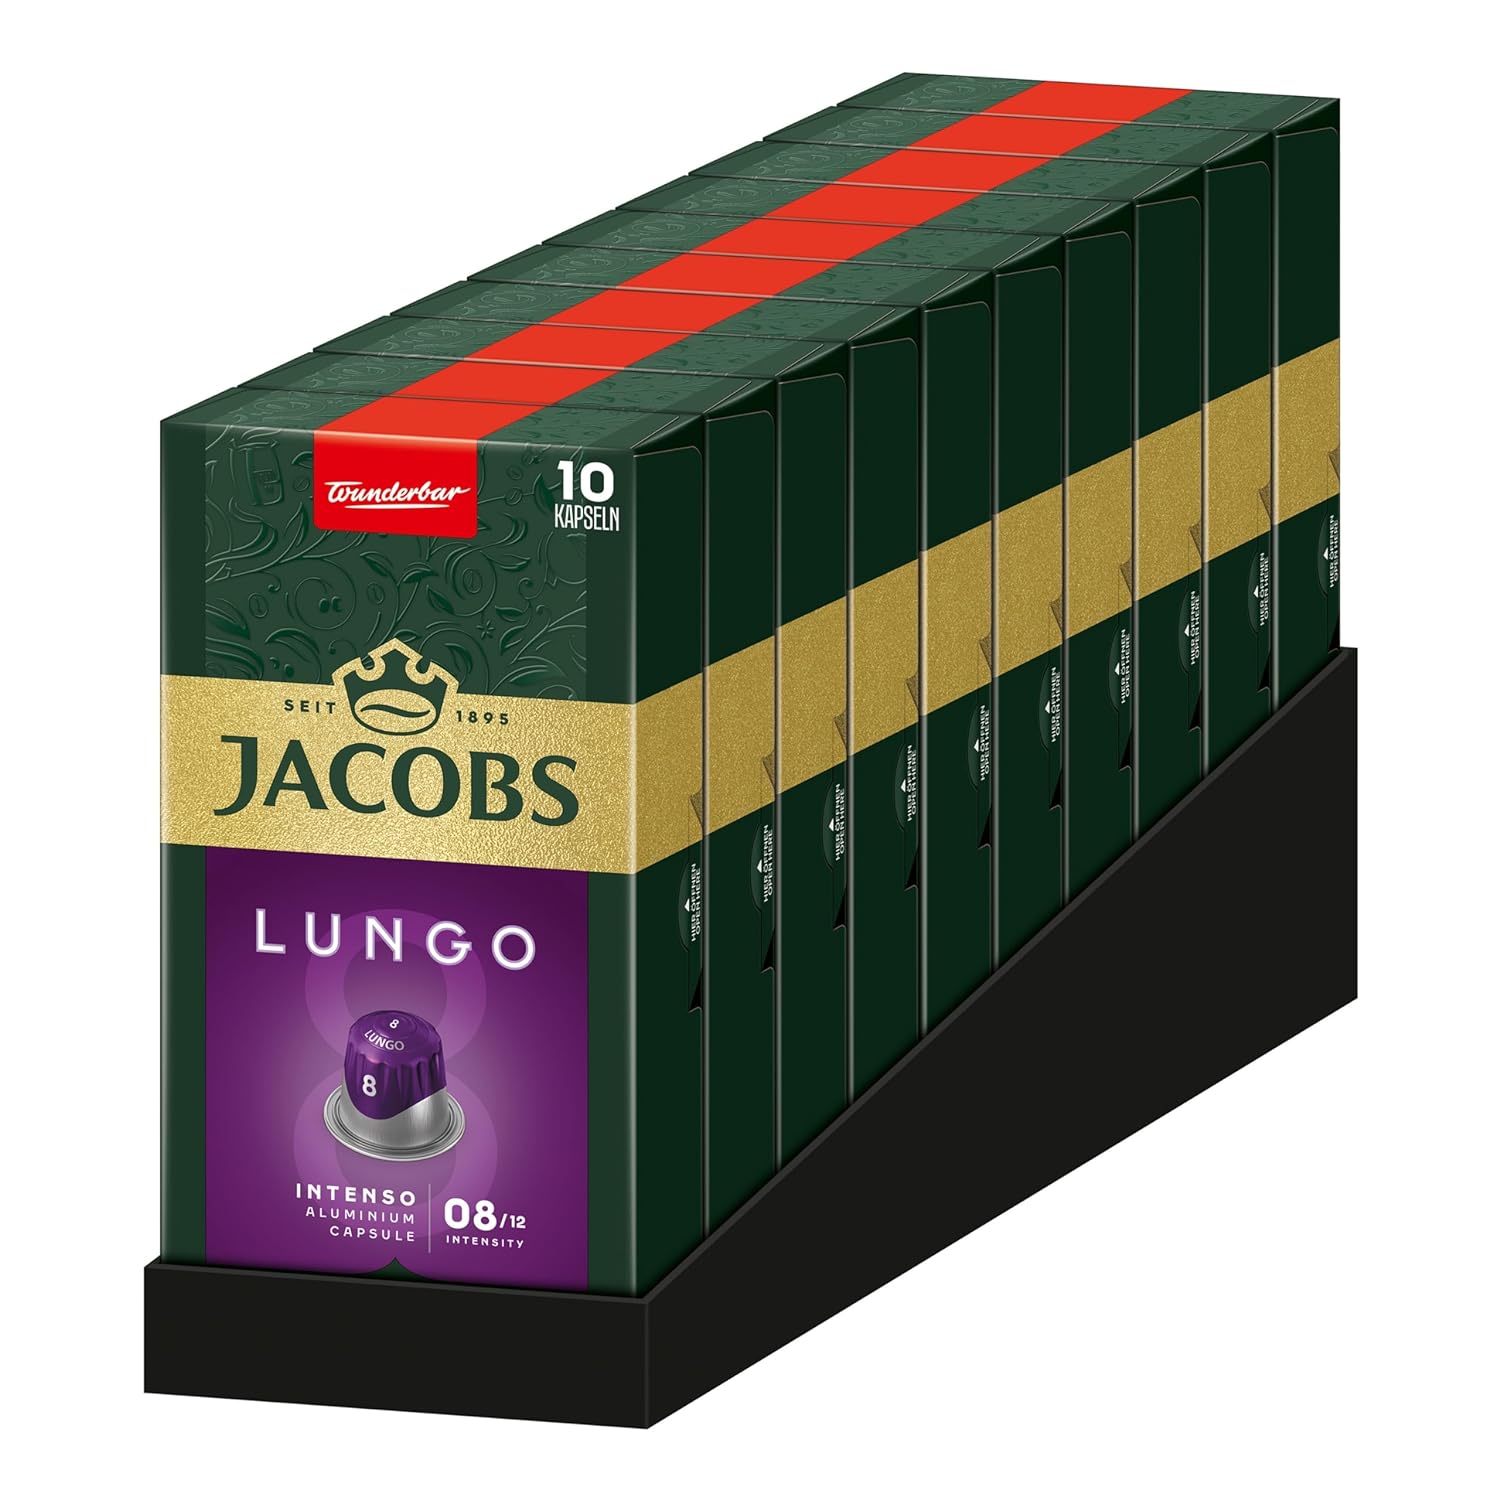 Jacobs Lungo Intenso Capsules, Intensity 8, 100 Nespresso®* Compatible Coffee Capsules, Pack of 10, 10 x 10 Drinks